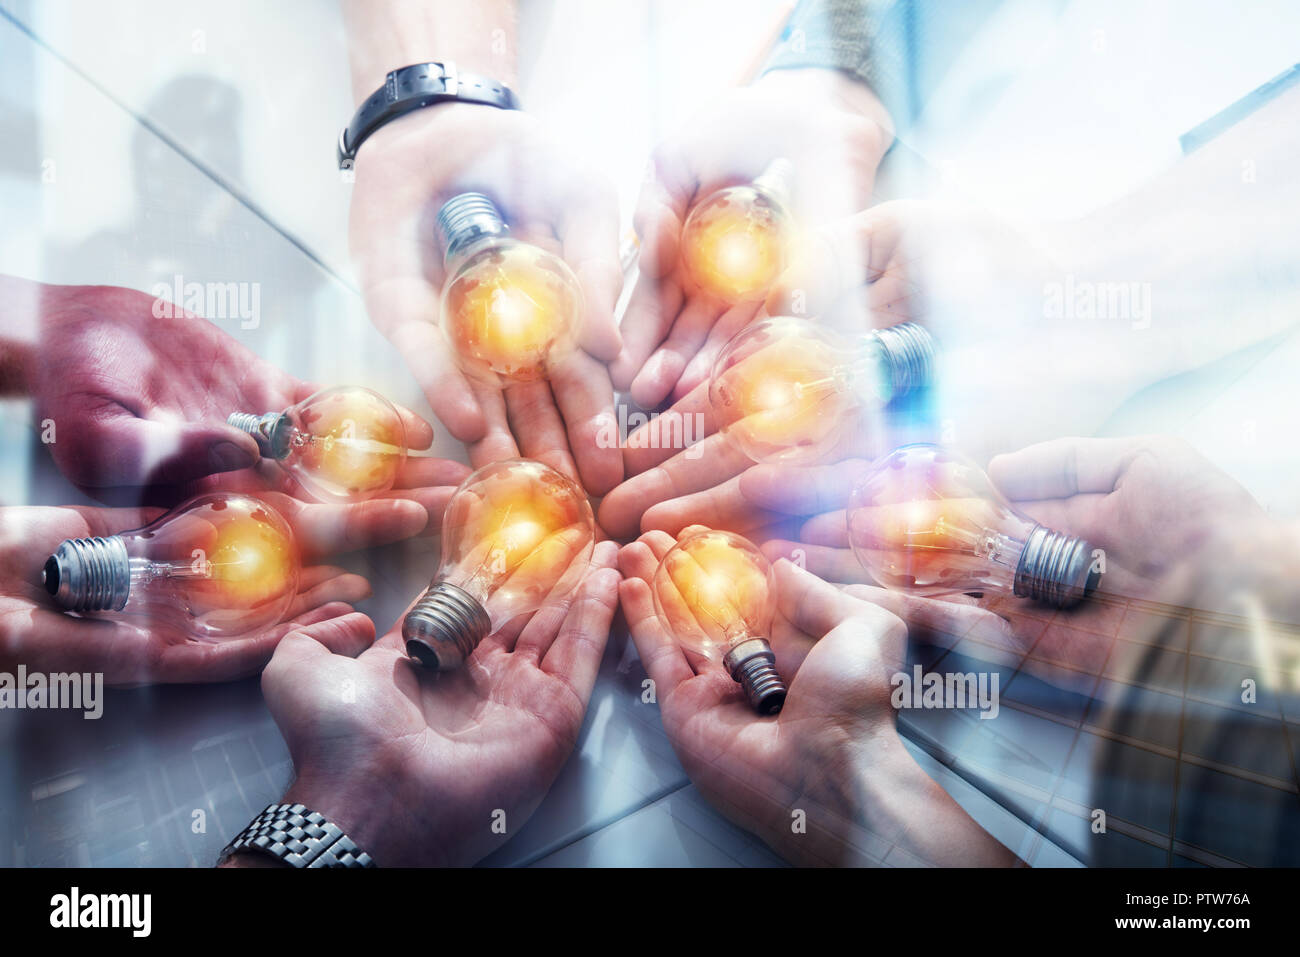 Teamwork and brainstorming concept with businessmen that share an idea with a lamp. Concept company startup. Double exposure Stock Photo